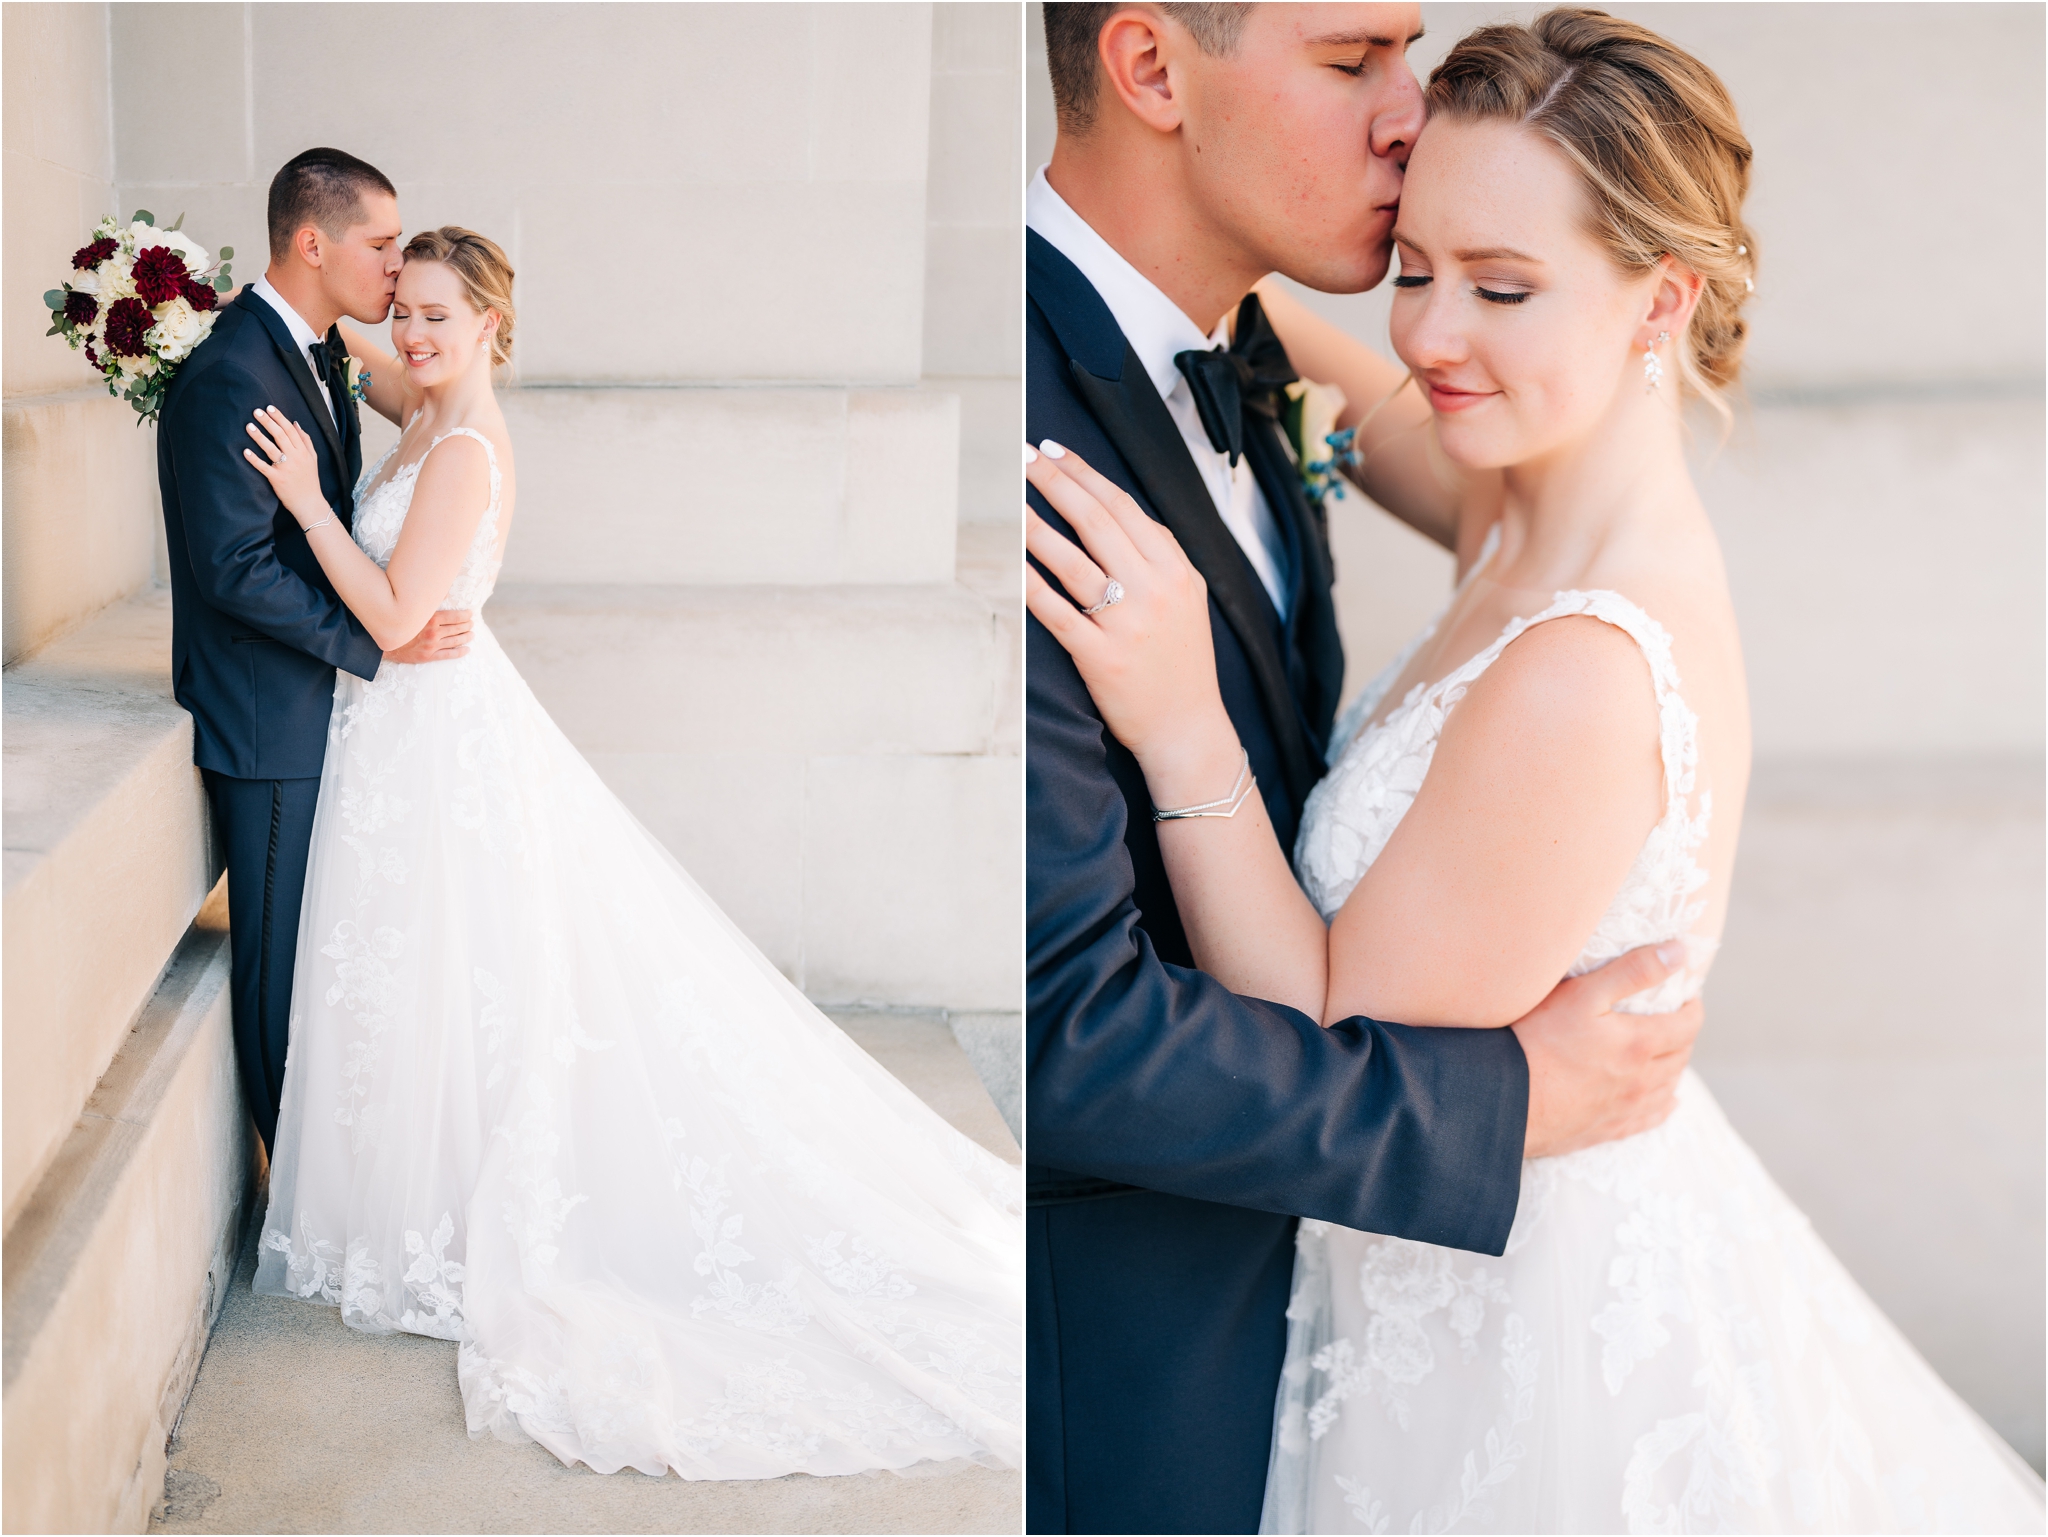 Bride and Groom Photos at the Indianapolis Central Library